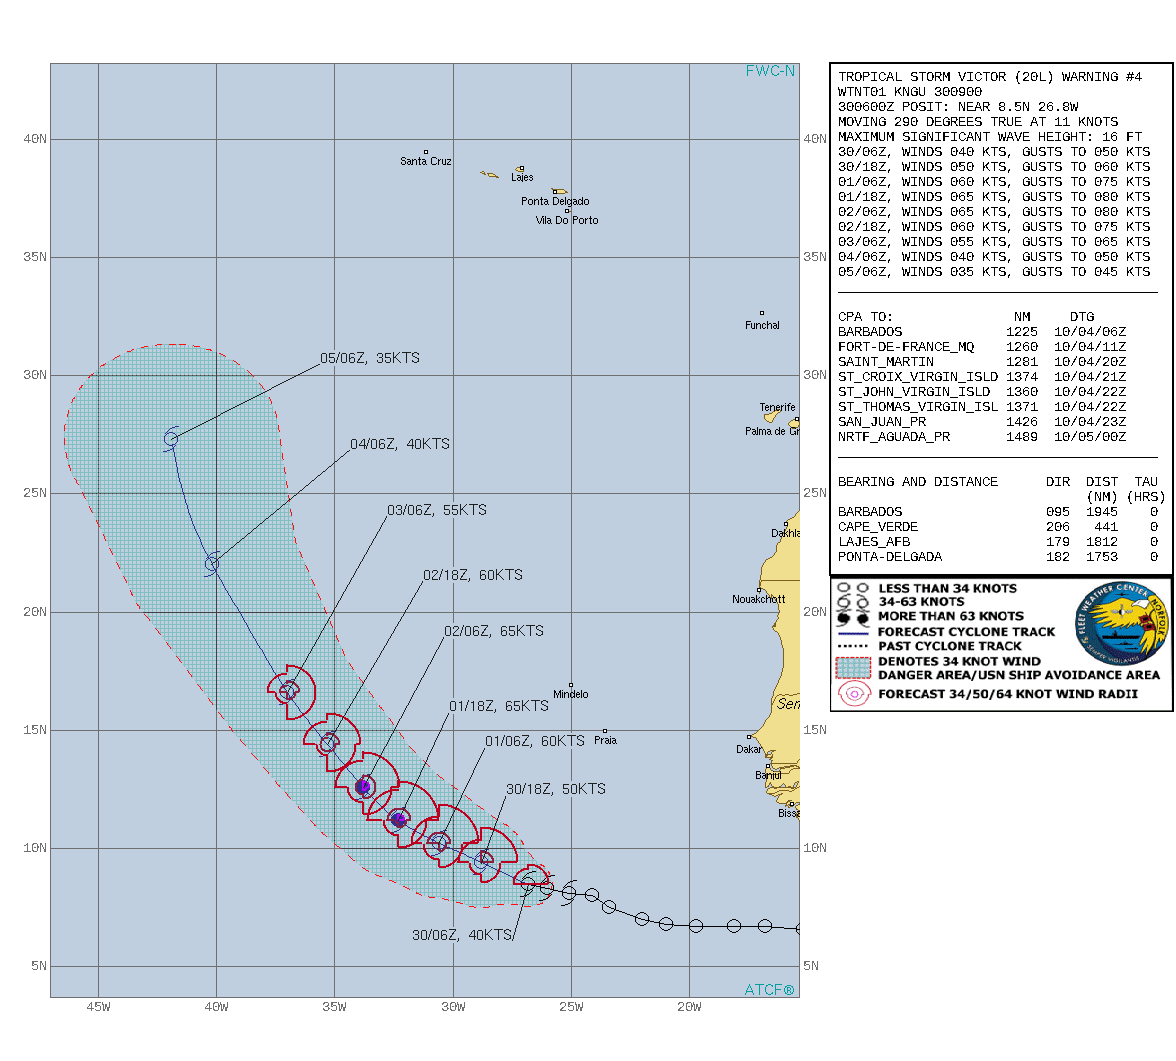 CURRENT INTENSITY IS 40KNOTS AND IS FORECAST TO PEAK AT 65KNOTS BY 01/18UTC.